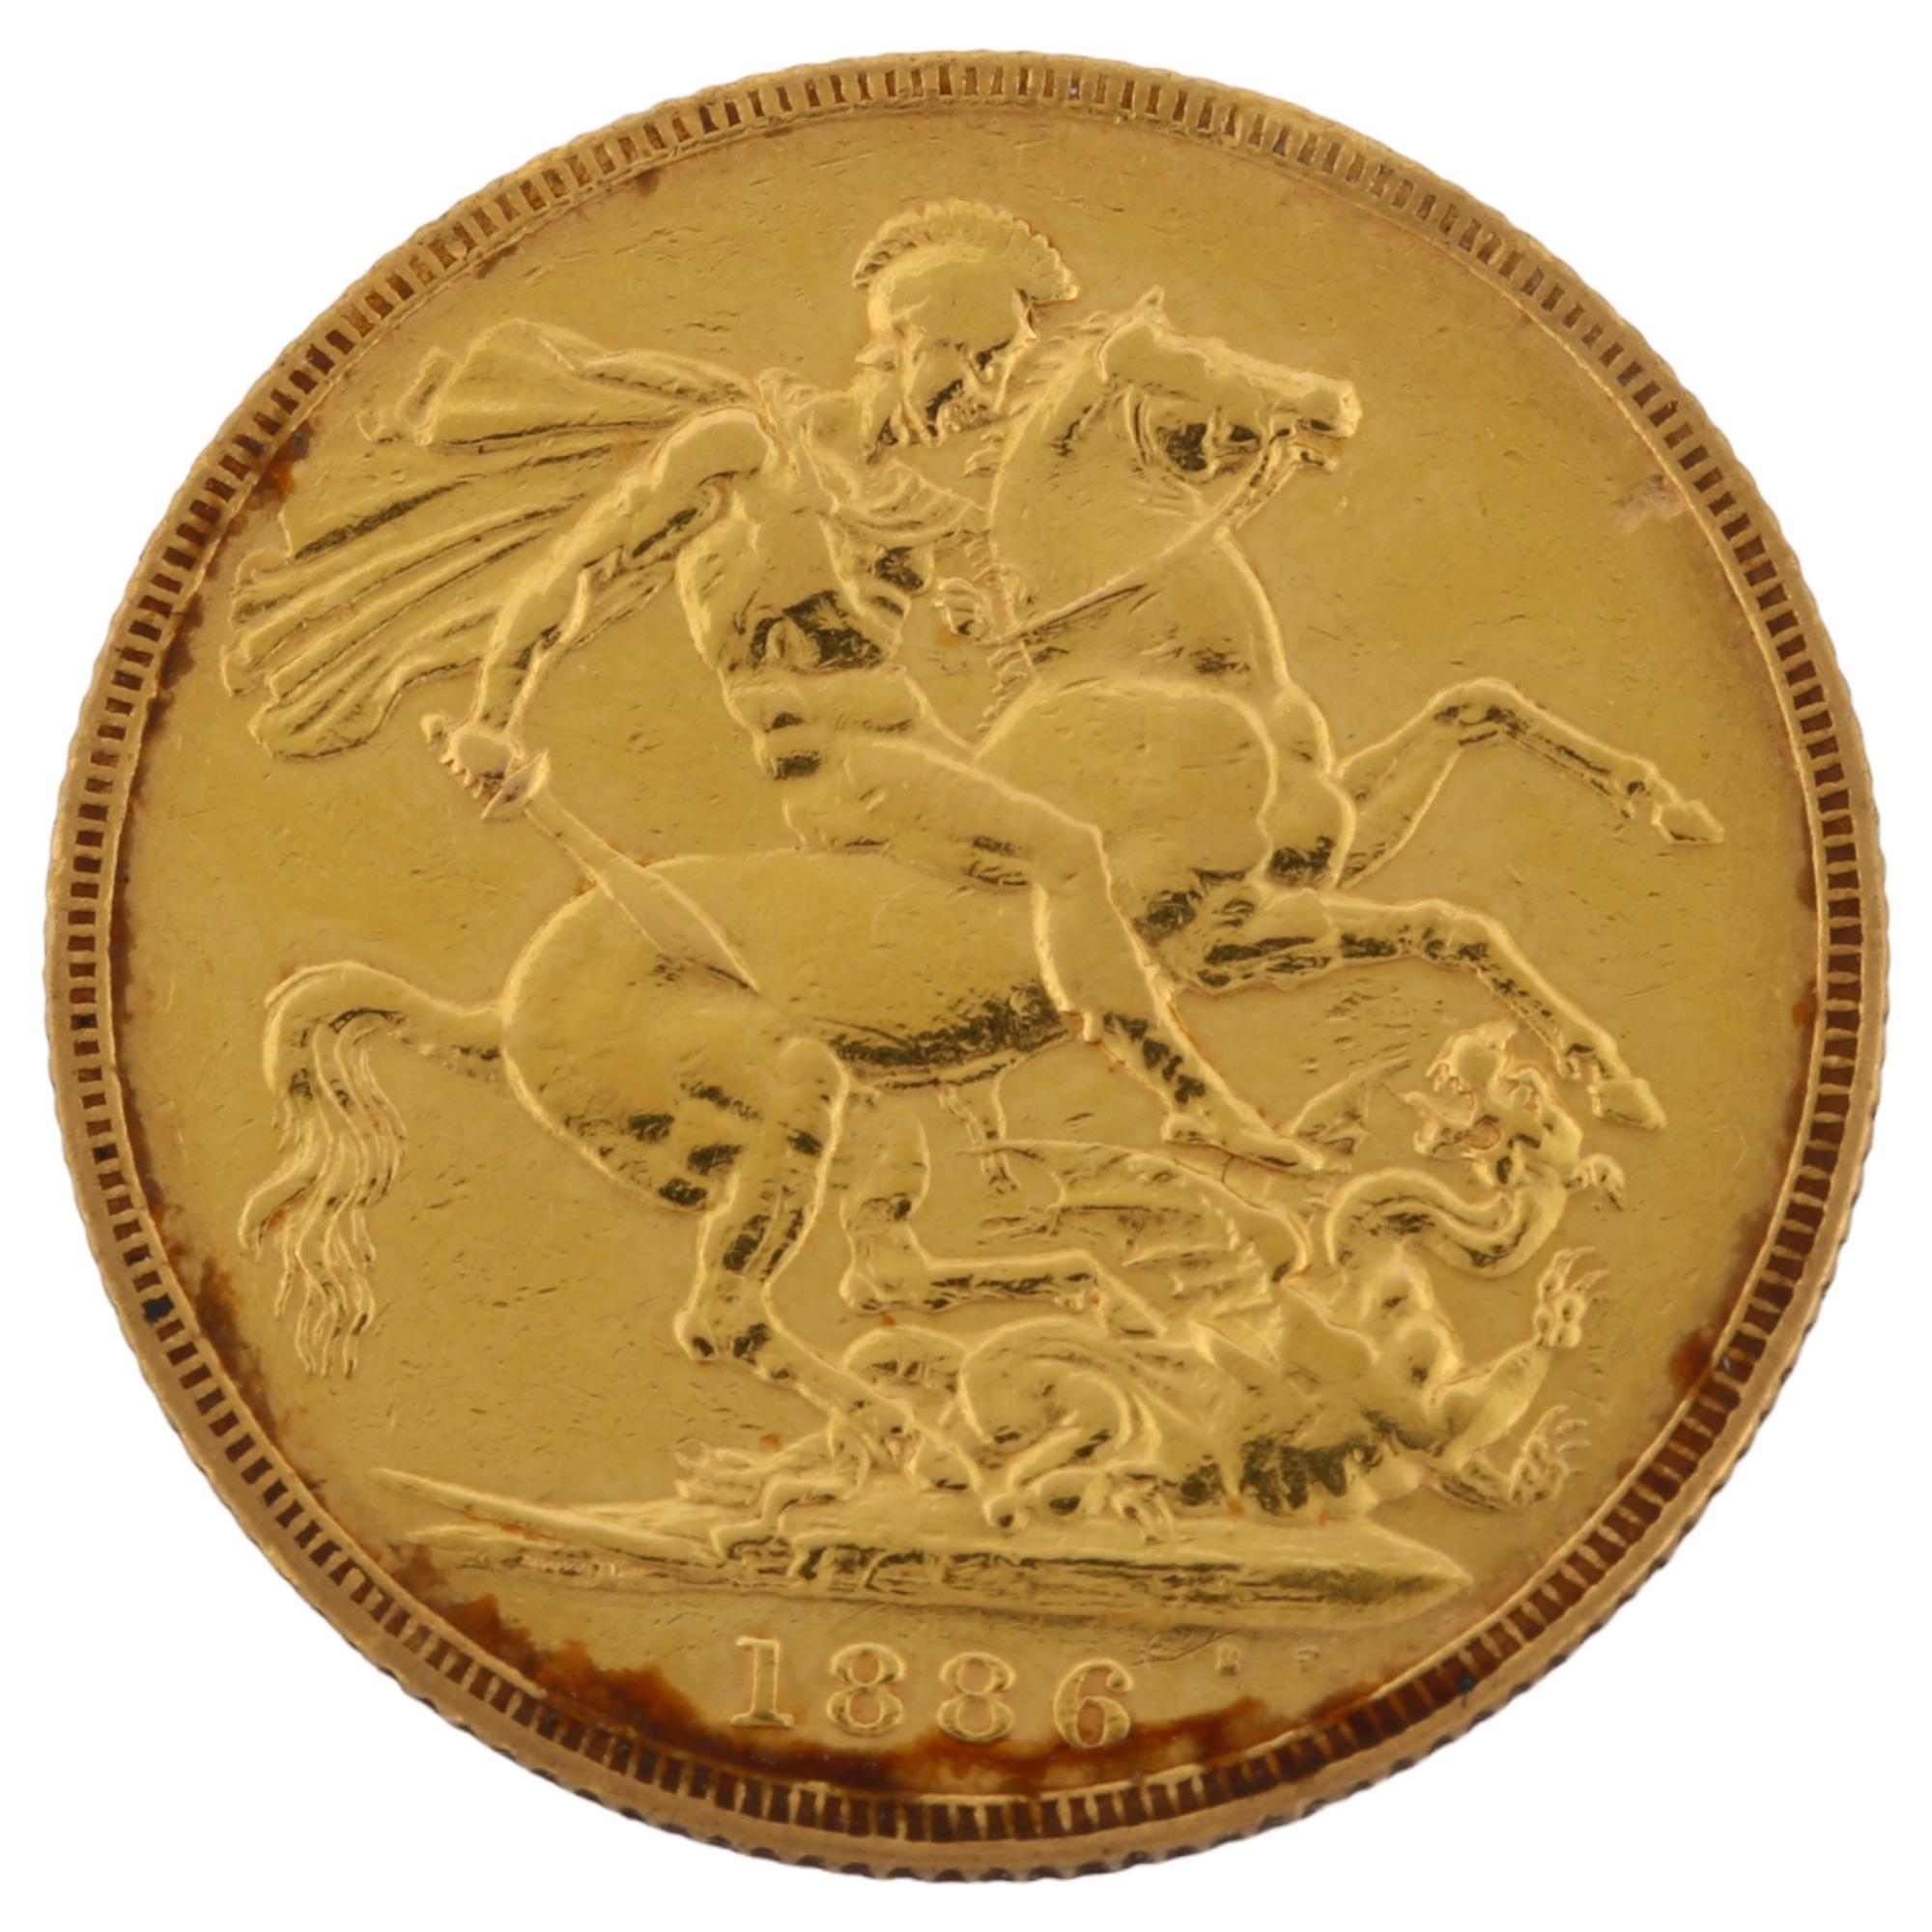 A Victoria 1886 gold full sovereign coin, Melbourne Mint, 7.9g Light surface wear to high points